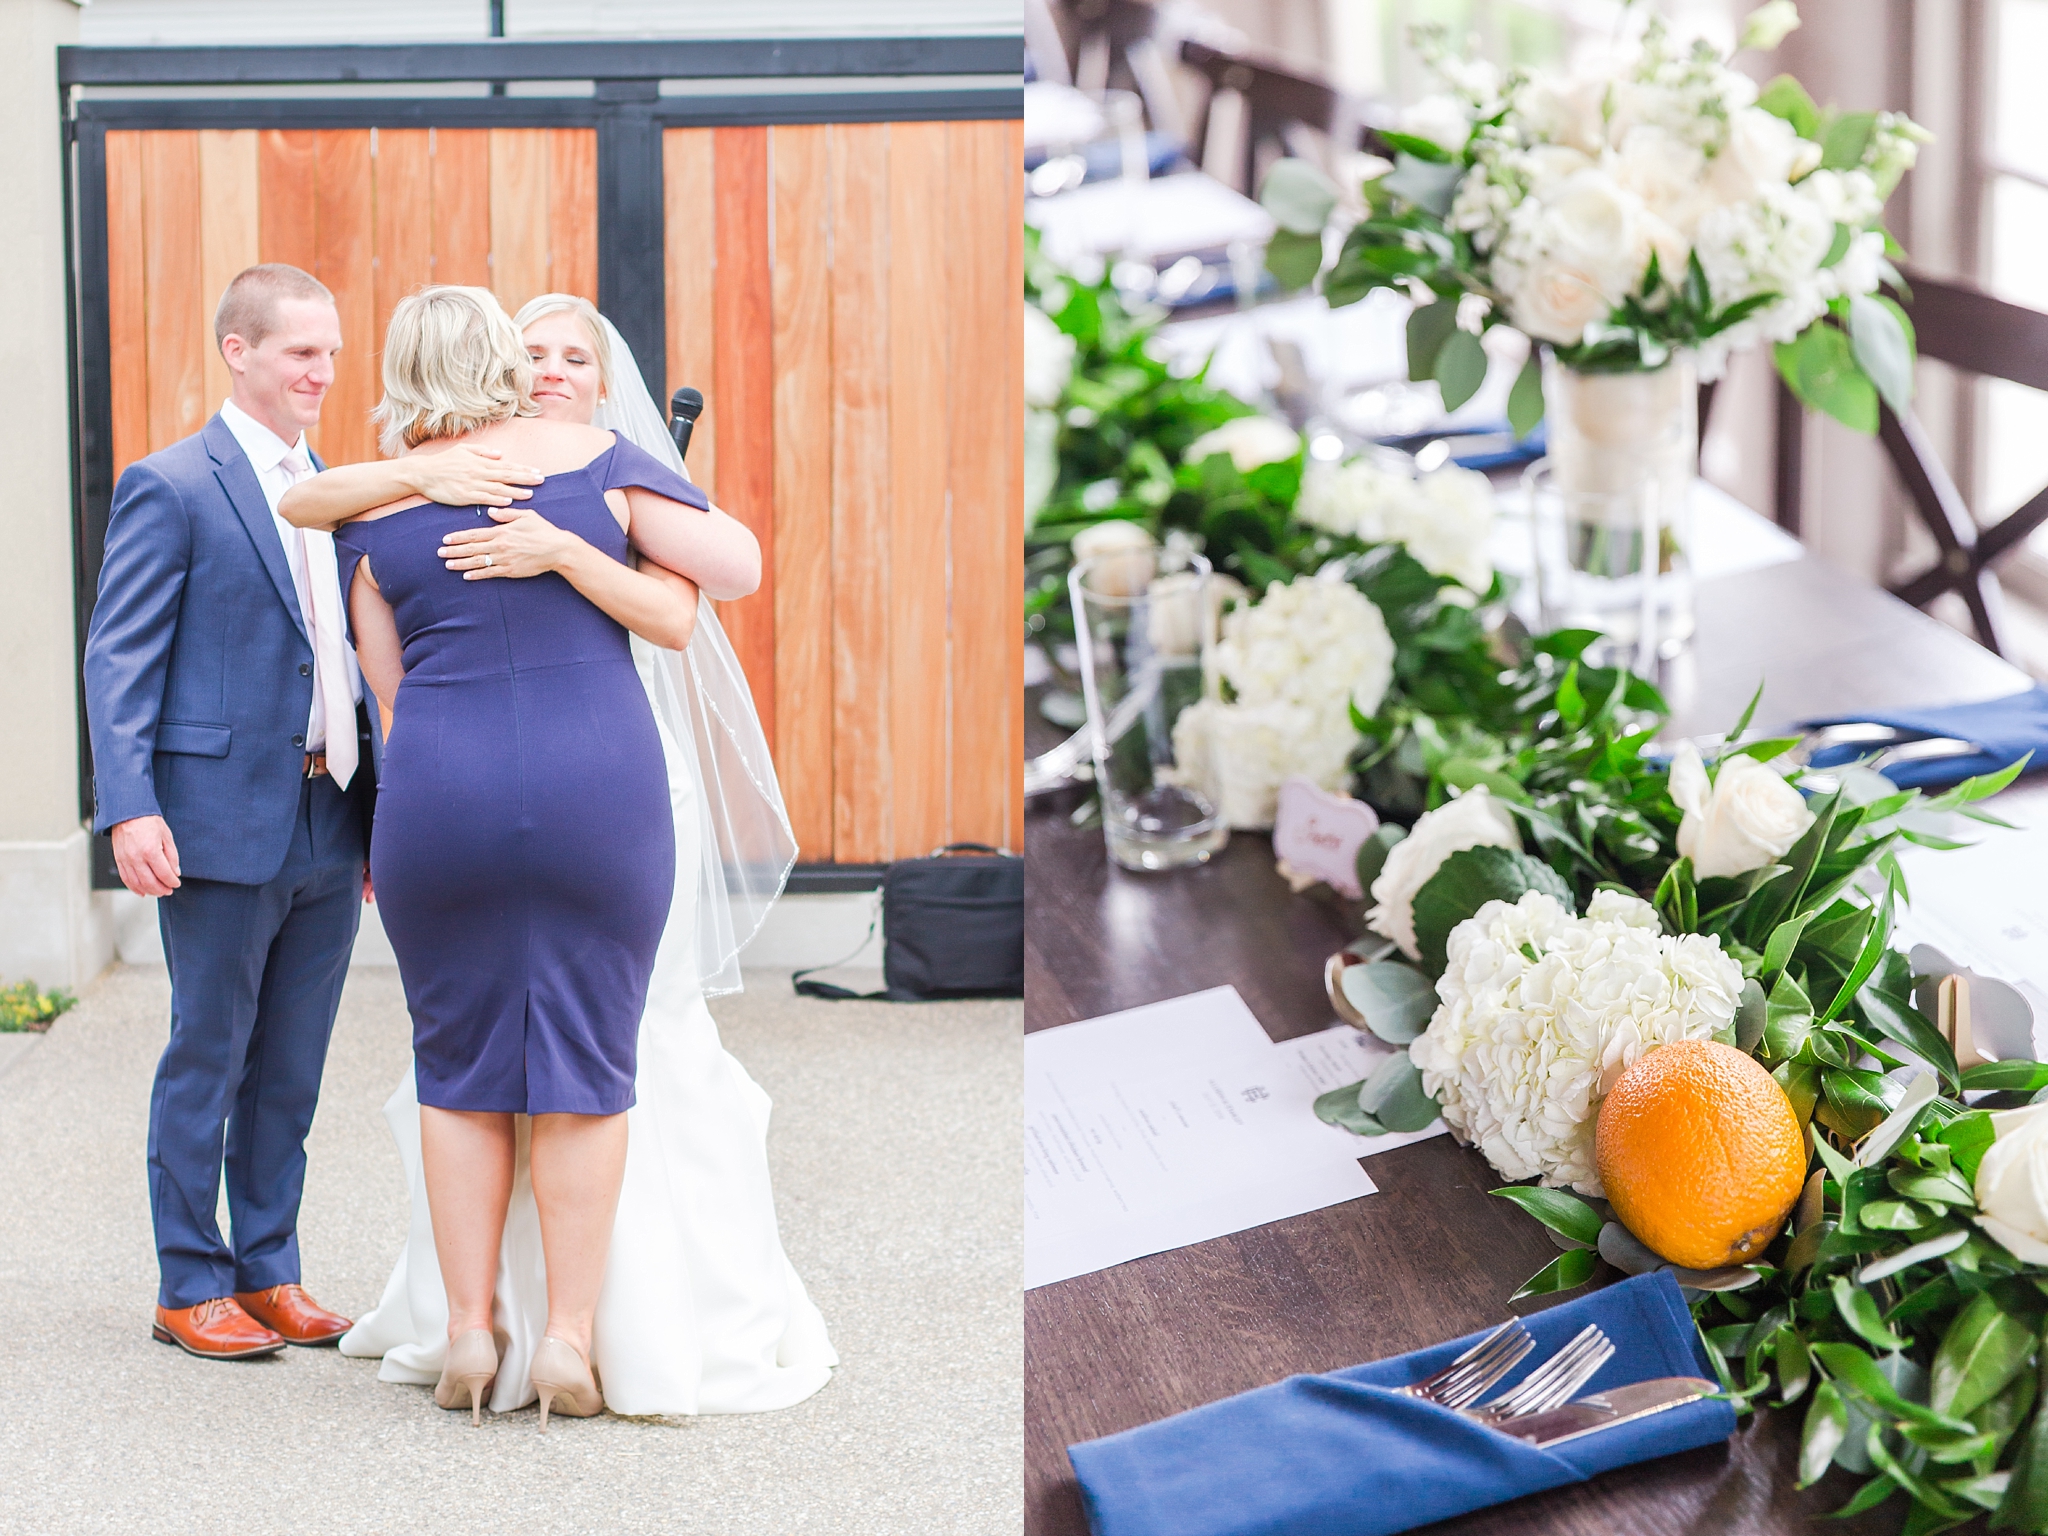 casually-chic-modern-wedding-photos-at-the-chapman-house-in-rochester-michigan-by-courtney-carolyn-photography_0058.jpg